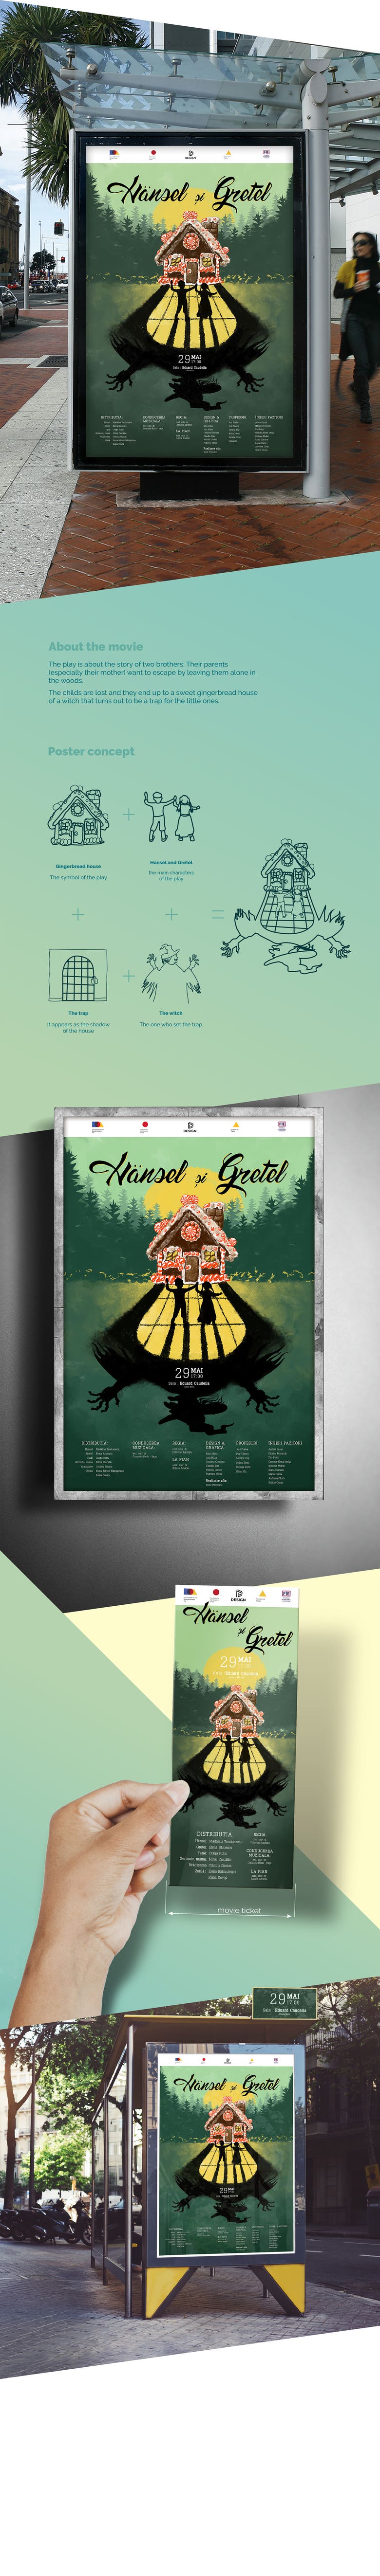 Hansel and Gretel - Theater poster